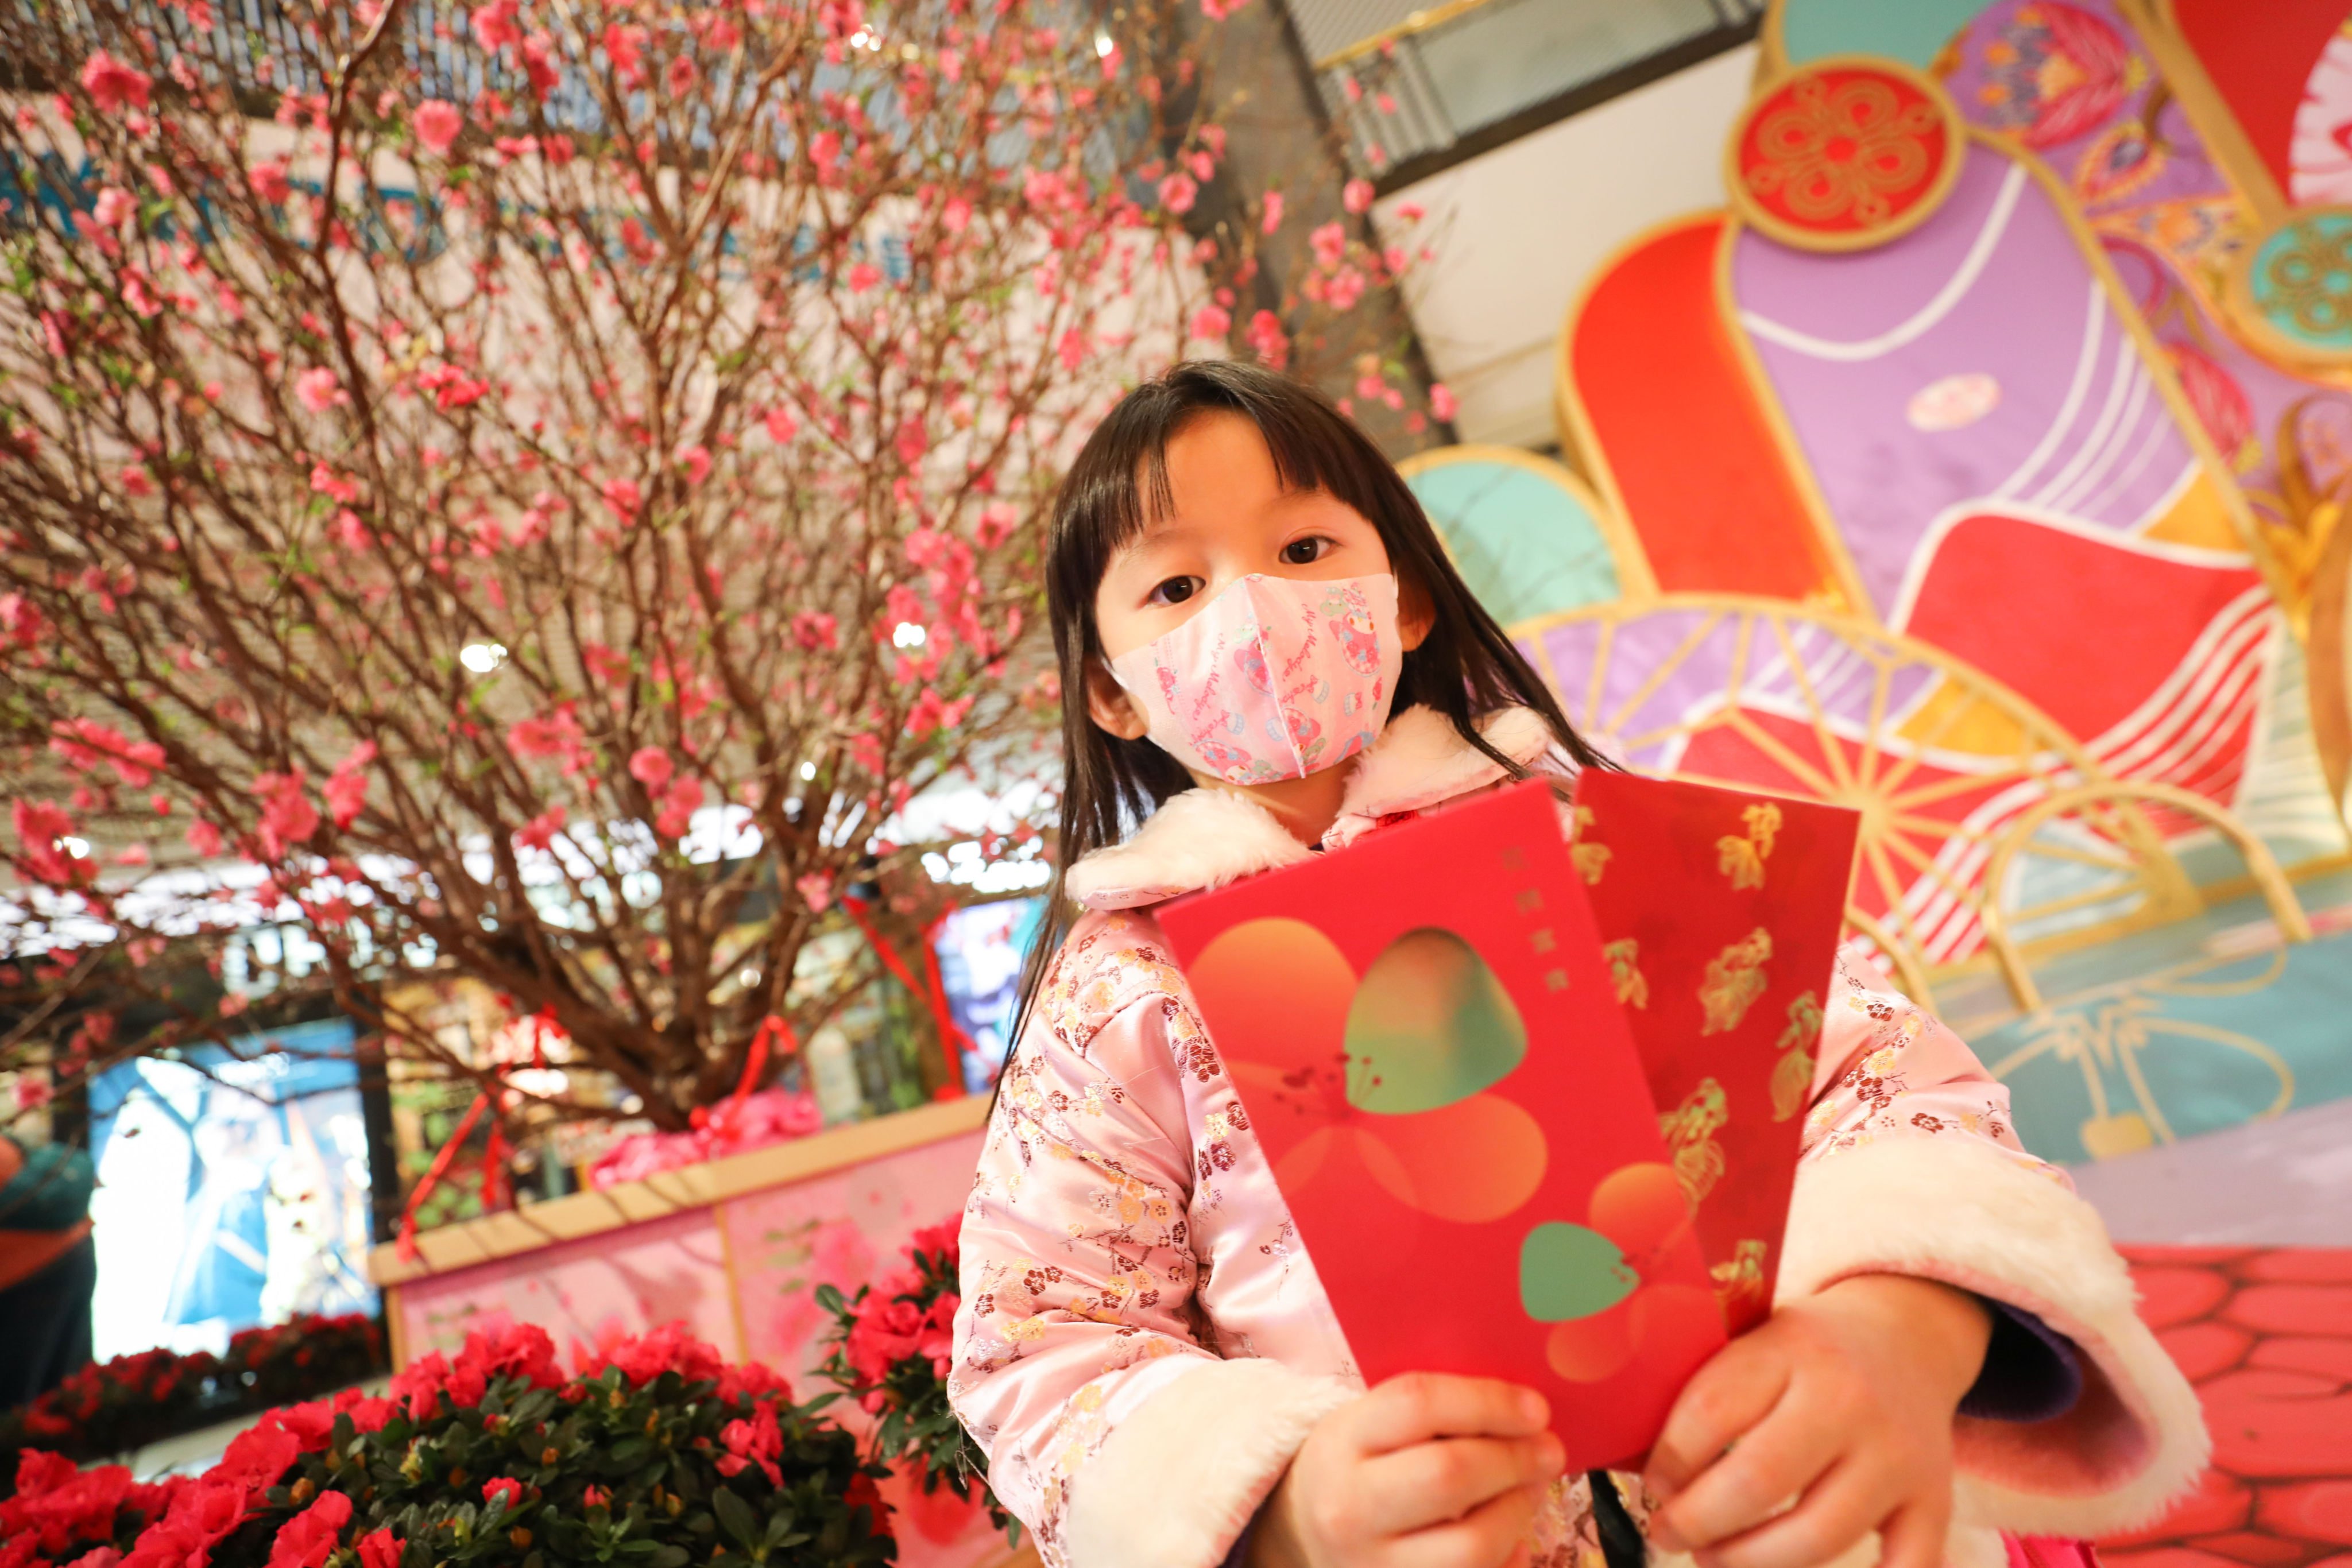 The Lunar New Year tradition of giving red packets (lai see in Cantonese) dates back centuries, and was originally meant to ward off evil spirits. Photo: Jelly Tse